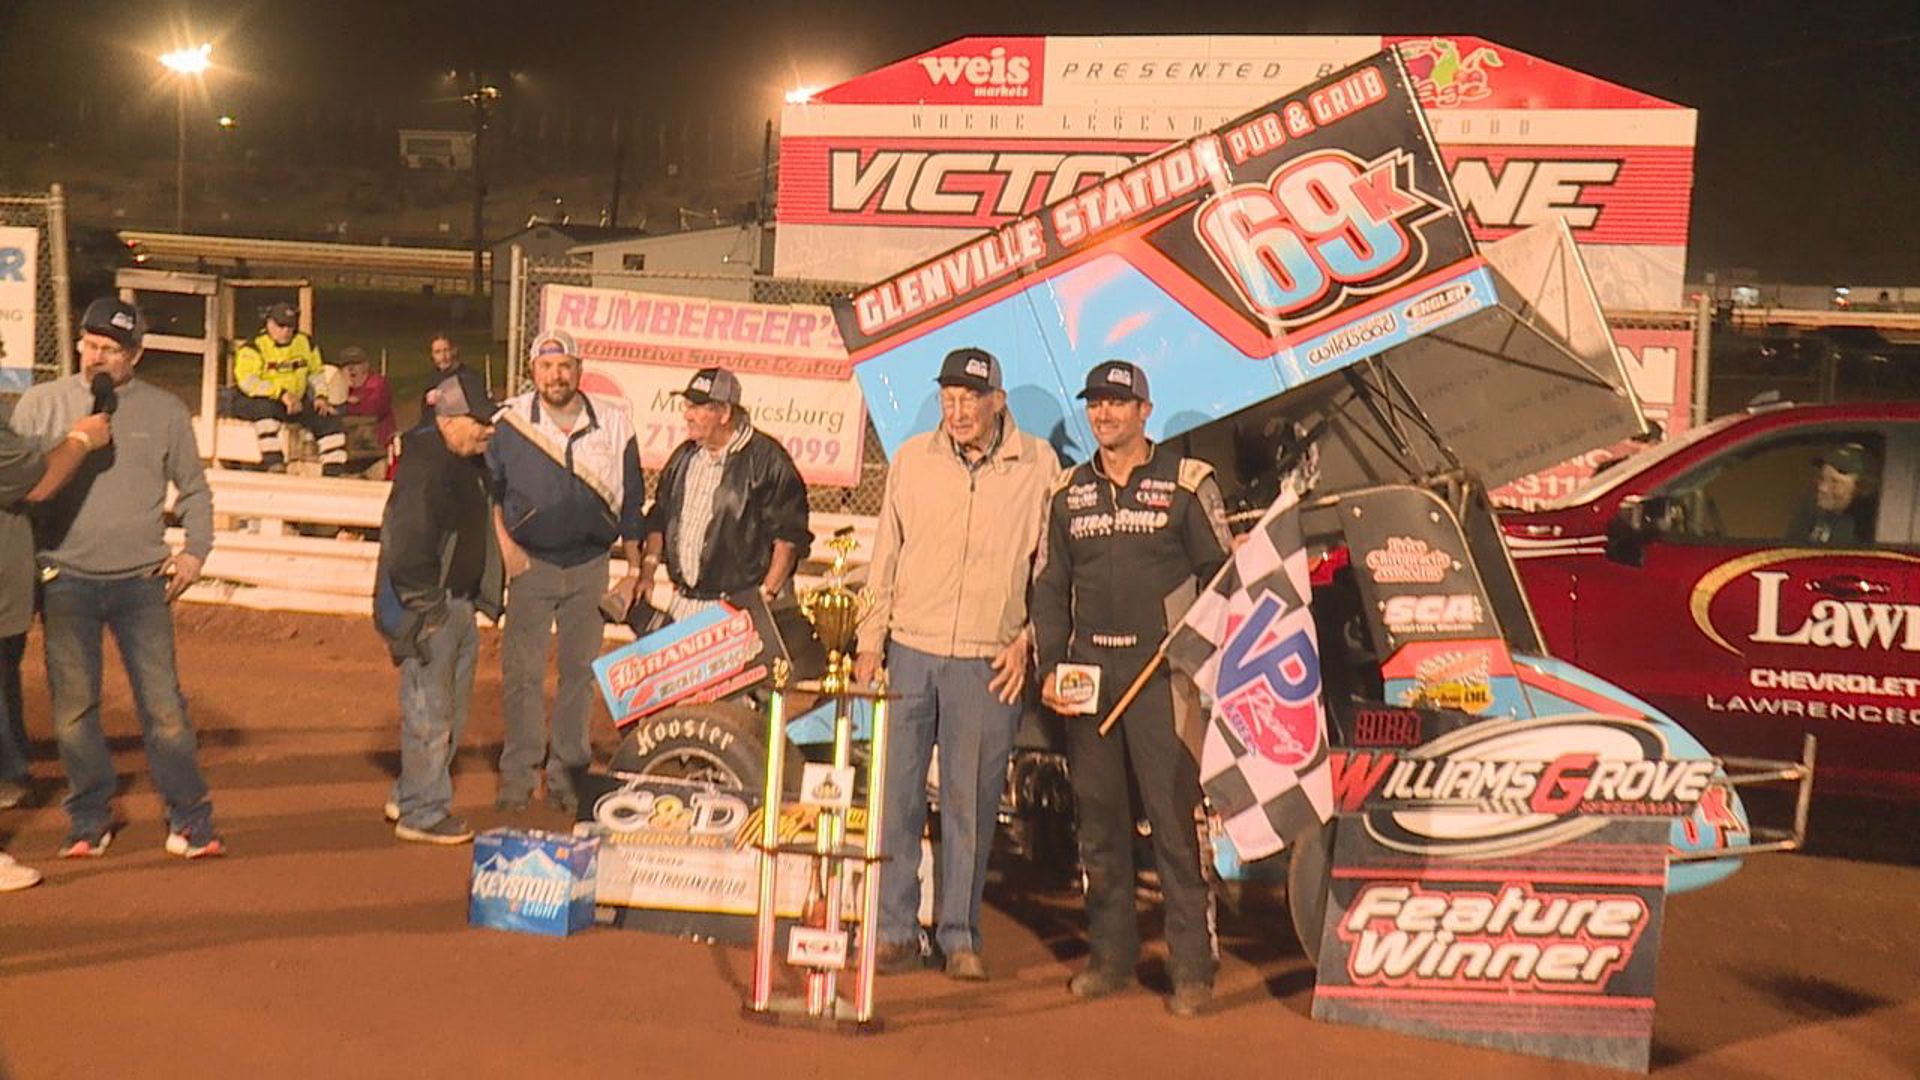 Daryn Pittman returned to Williams Grove Speedway on Friday for the first time in eight months, seeking victory after eight years away from the track's victory lane.